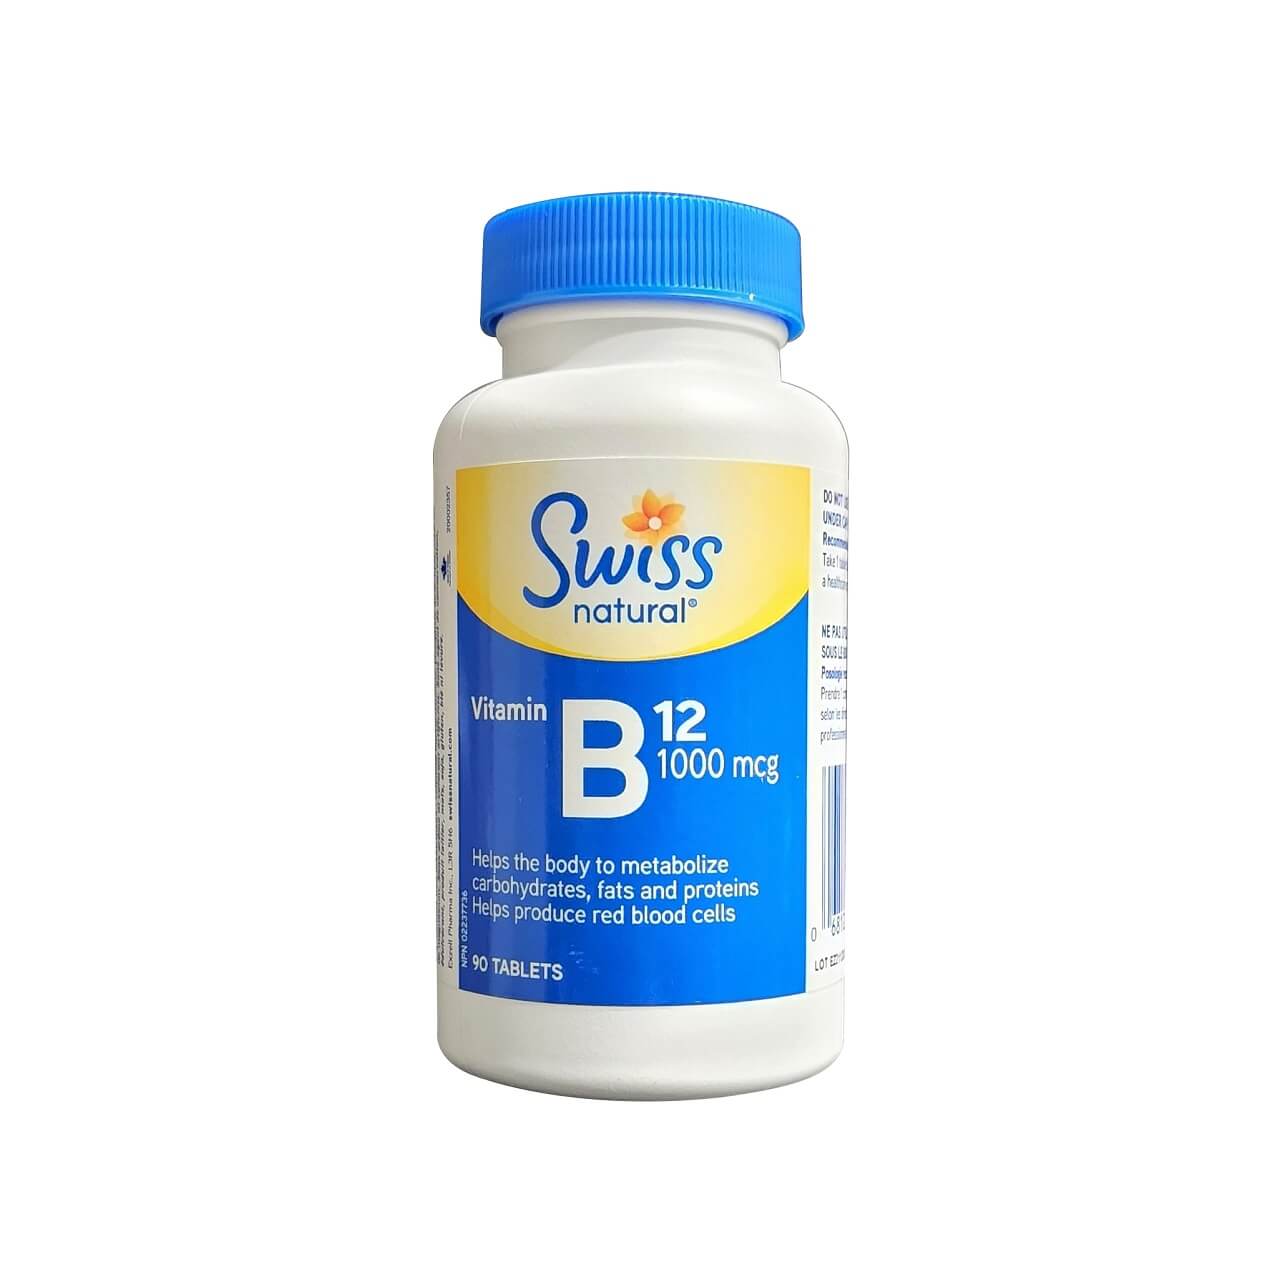 Product label for Swiss Natural Vitamin B12 1000 mcg (90 tablets) in English